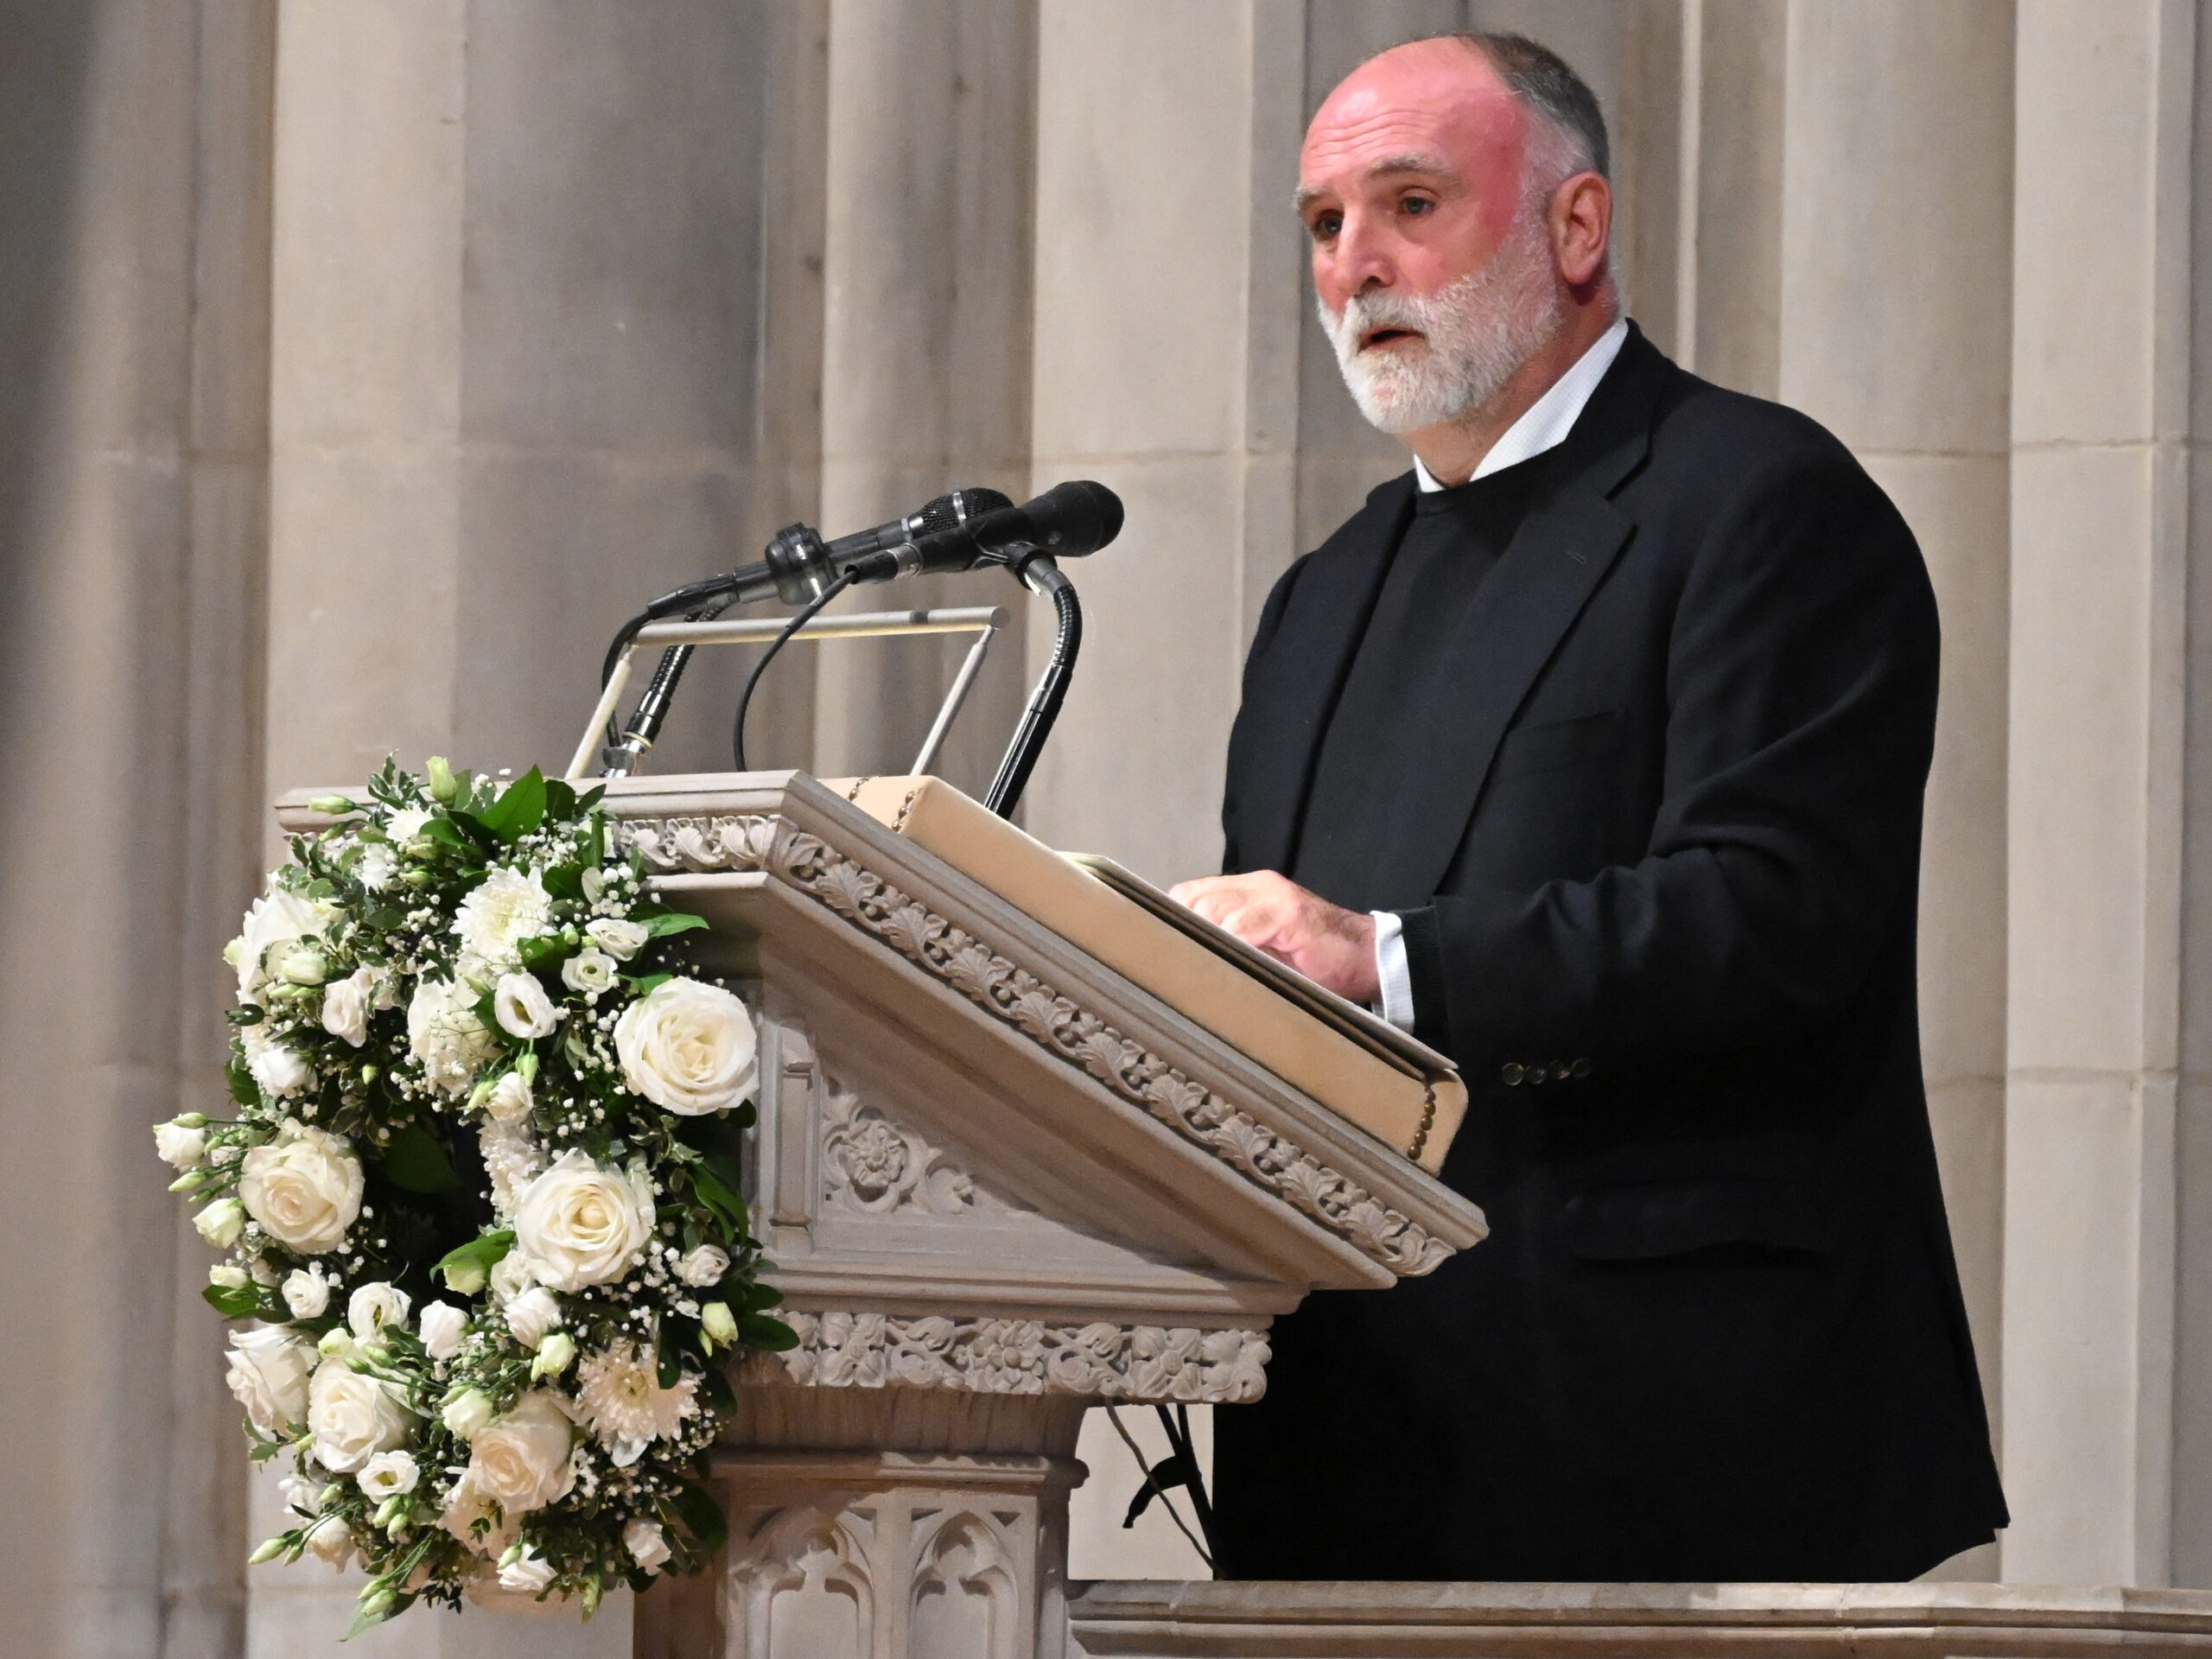 World Central Kitchen Founder José Andrés speaks Thursday at the Washington National Cathedral during an interfaith memorial service for the seven workers from the group who were killed in Gaza.